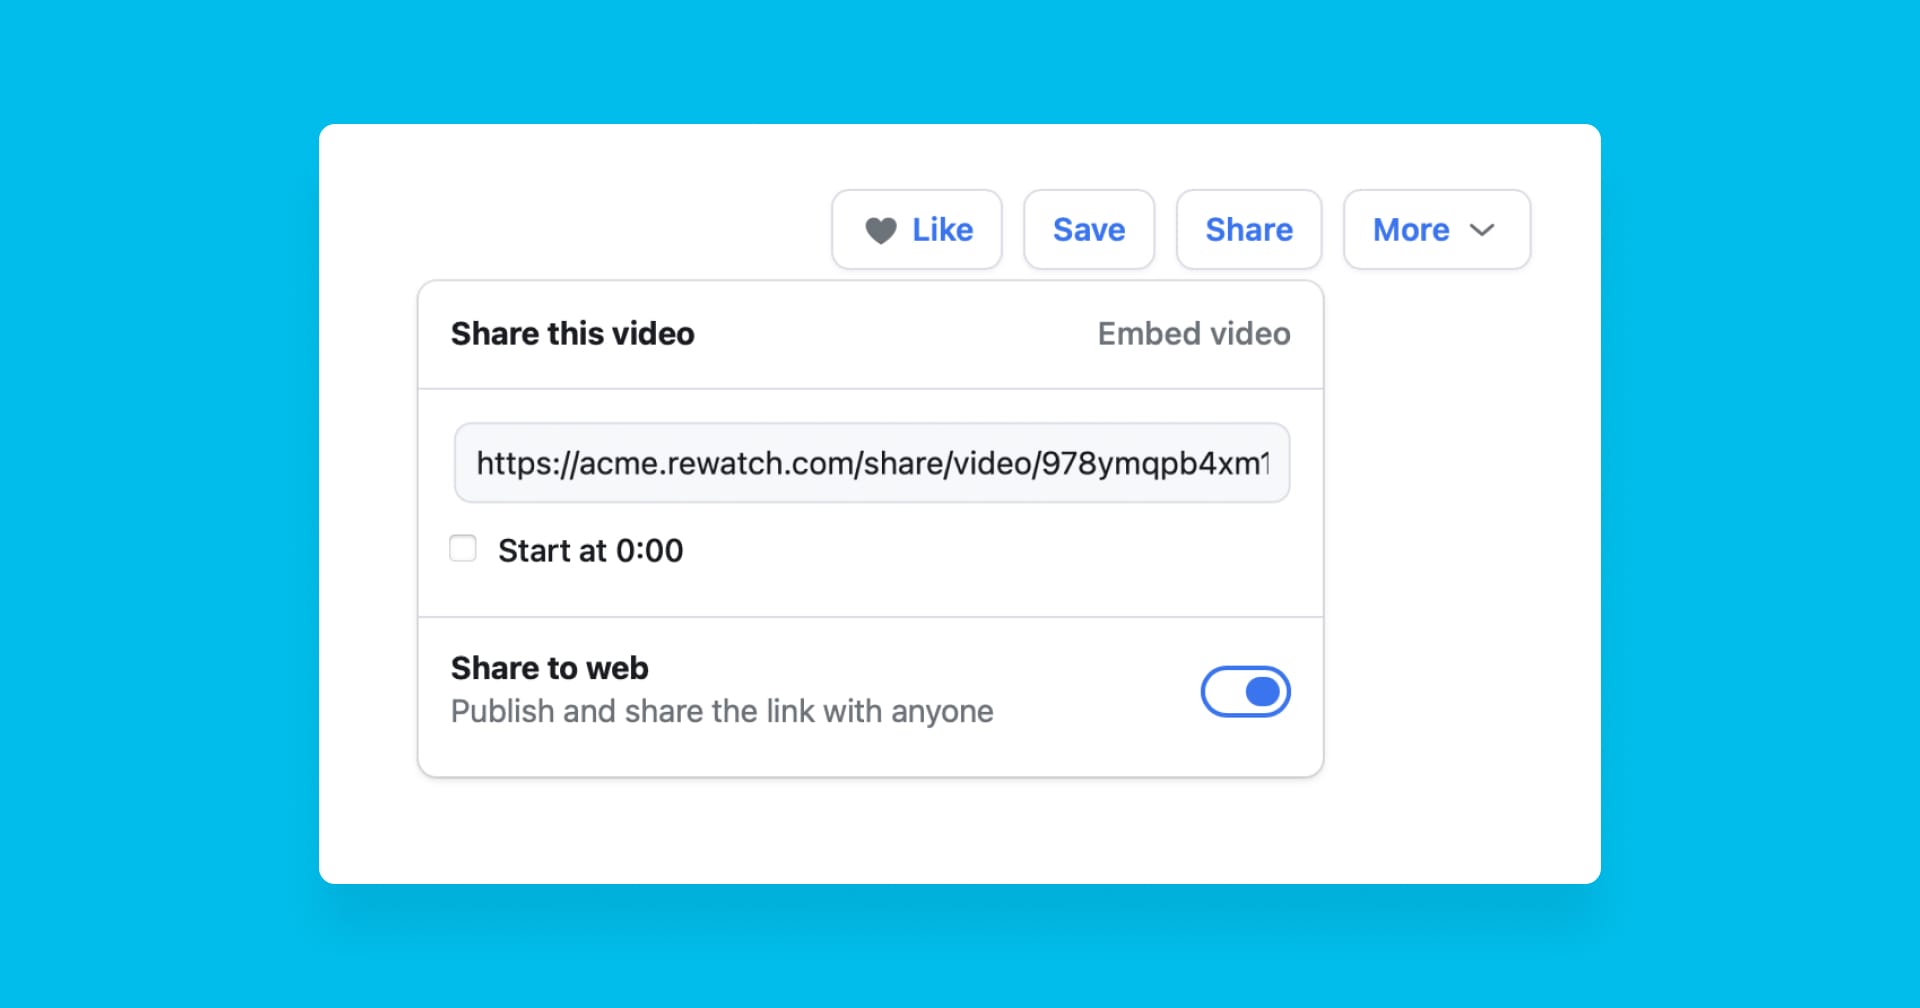 A modal with Rewatch's video sharing information